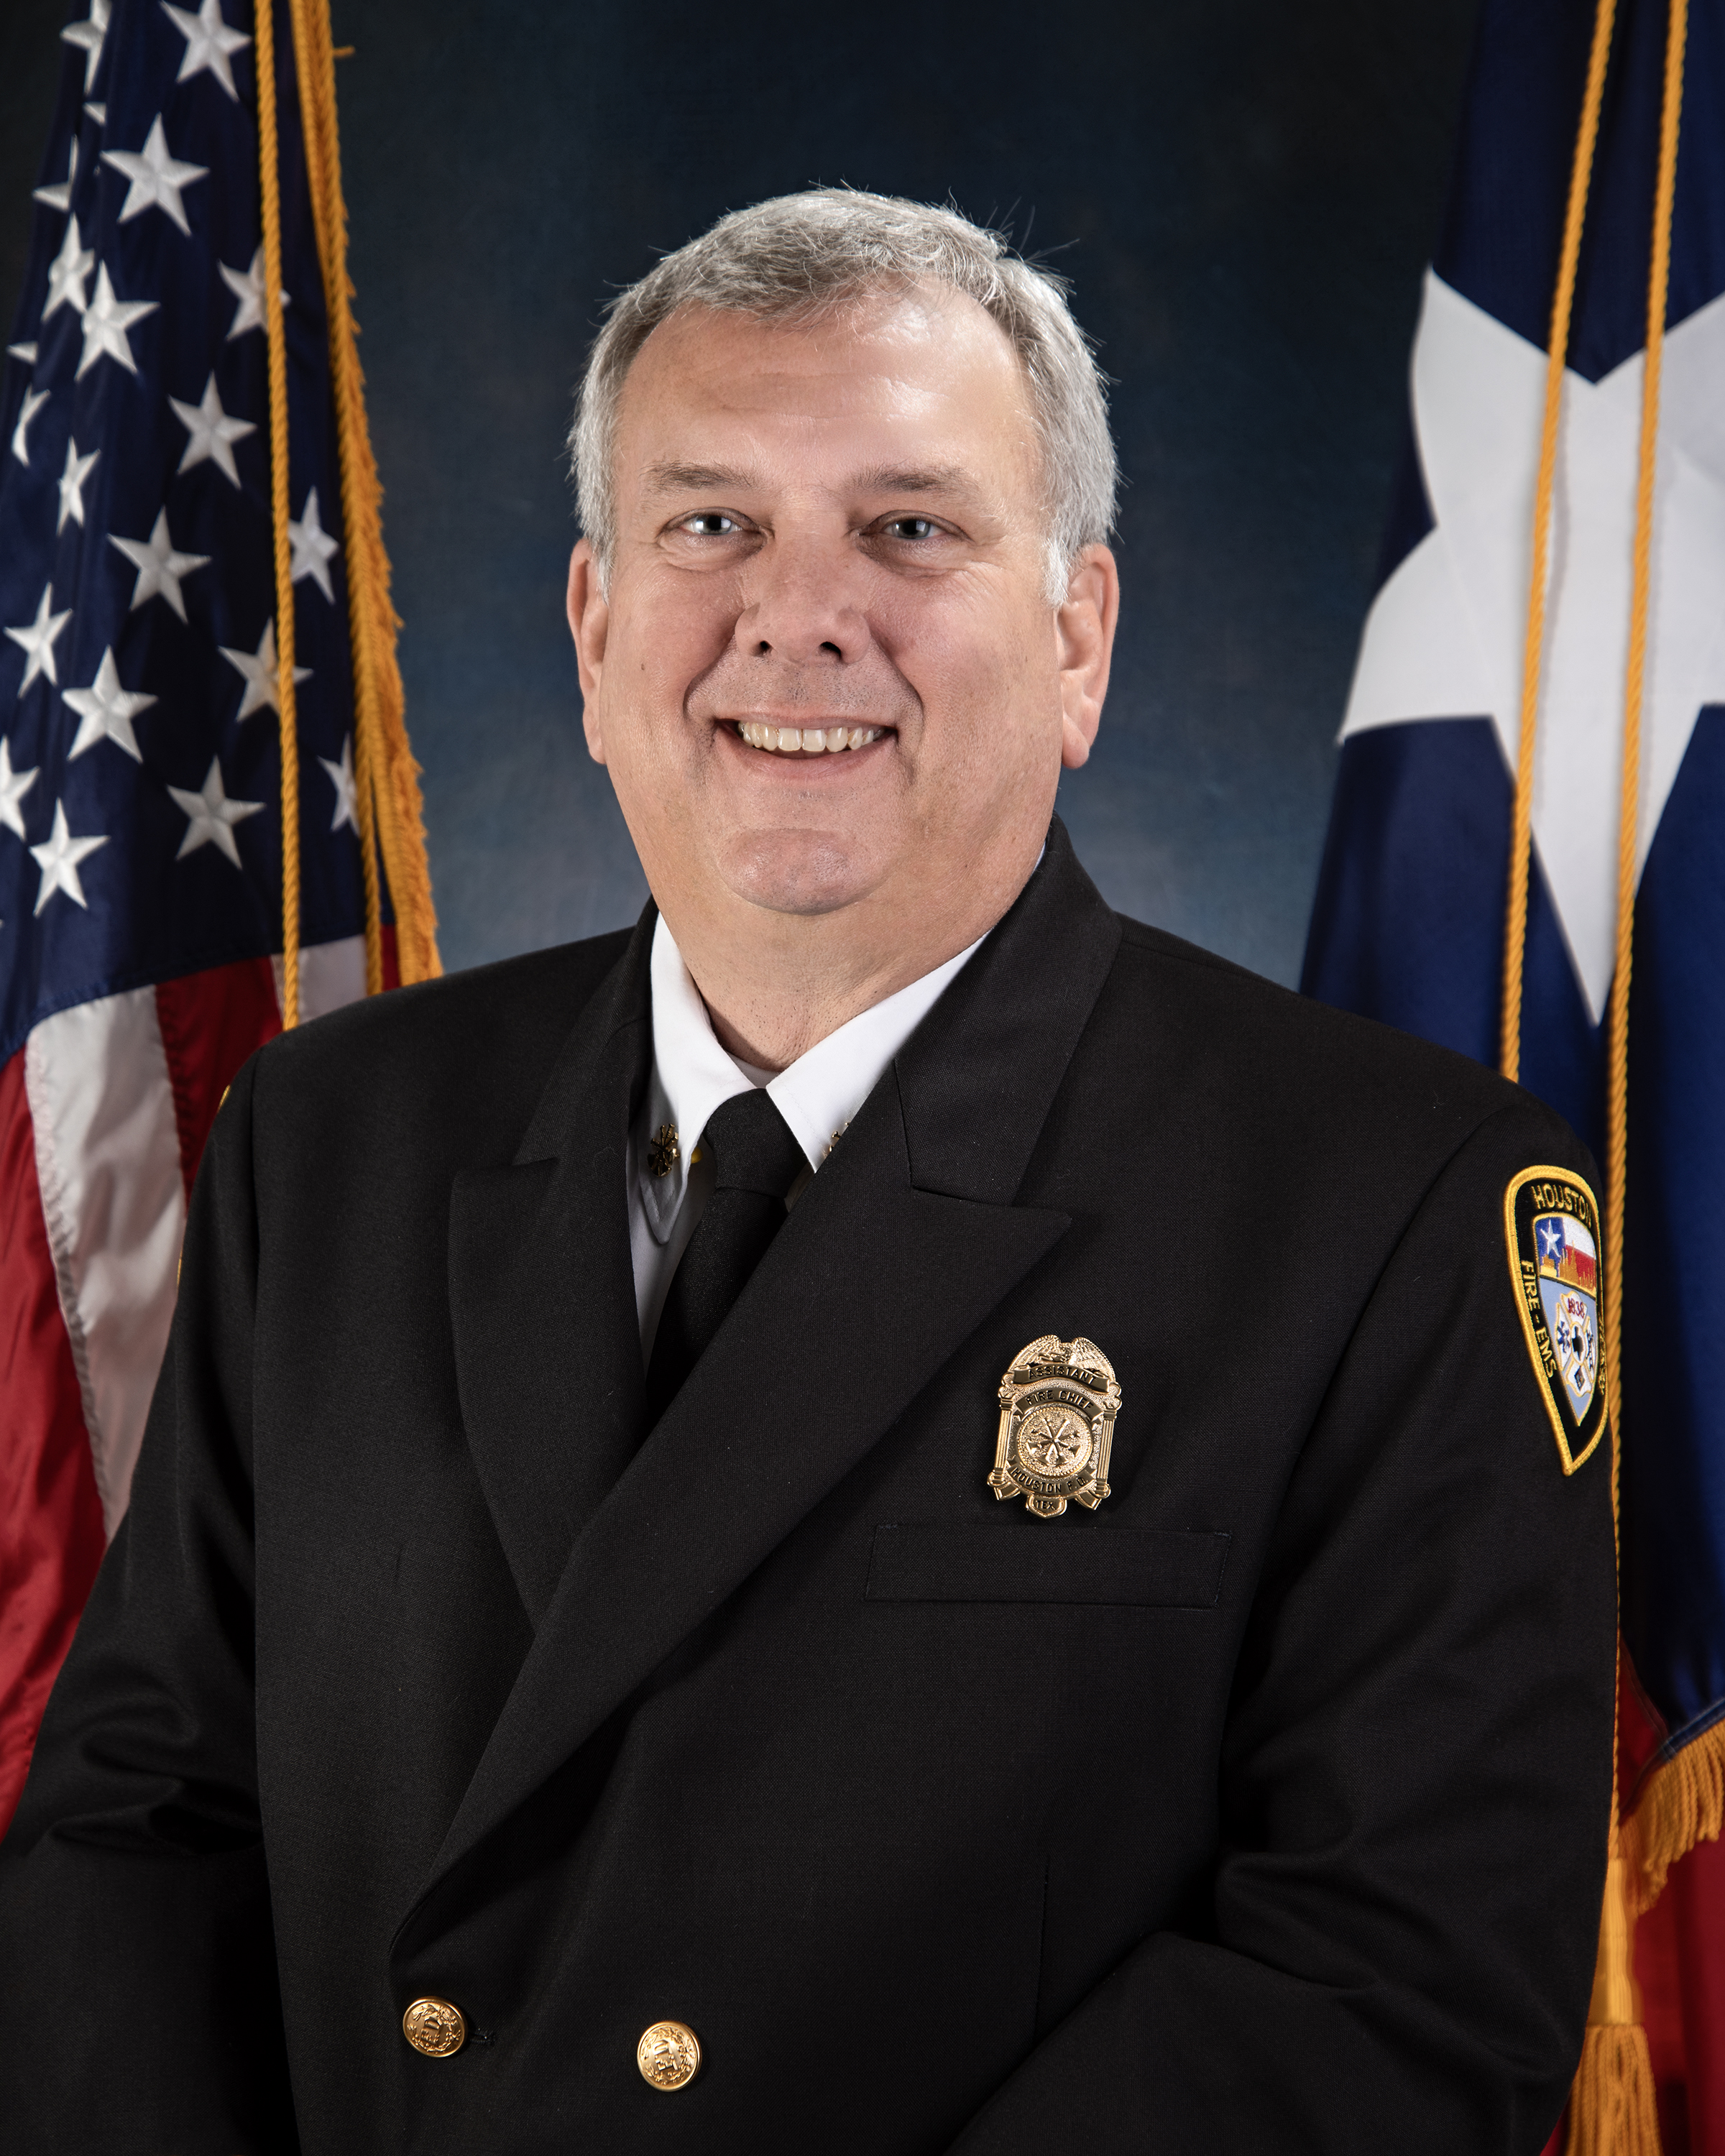 HFD Assistant Chief Russell Fritsch